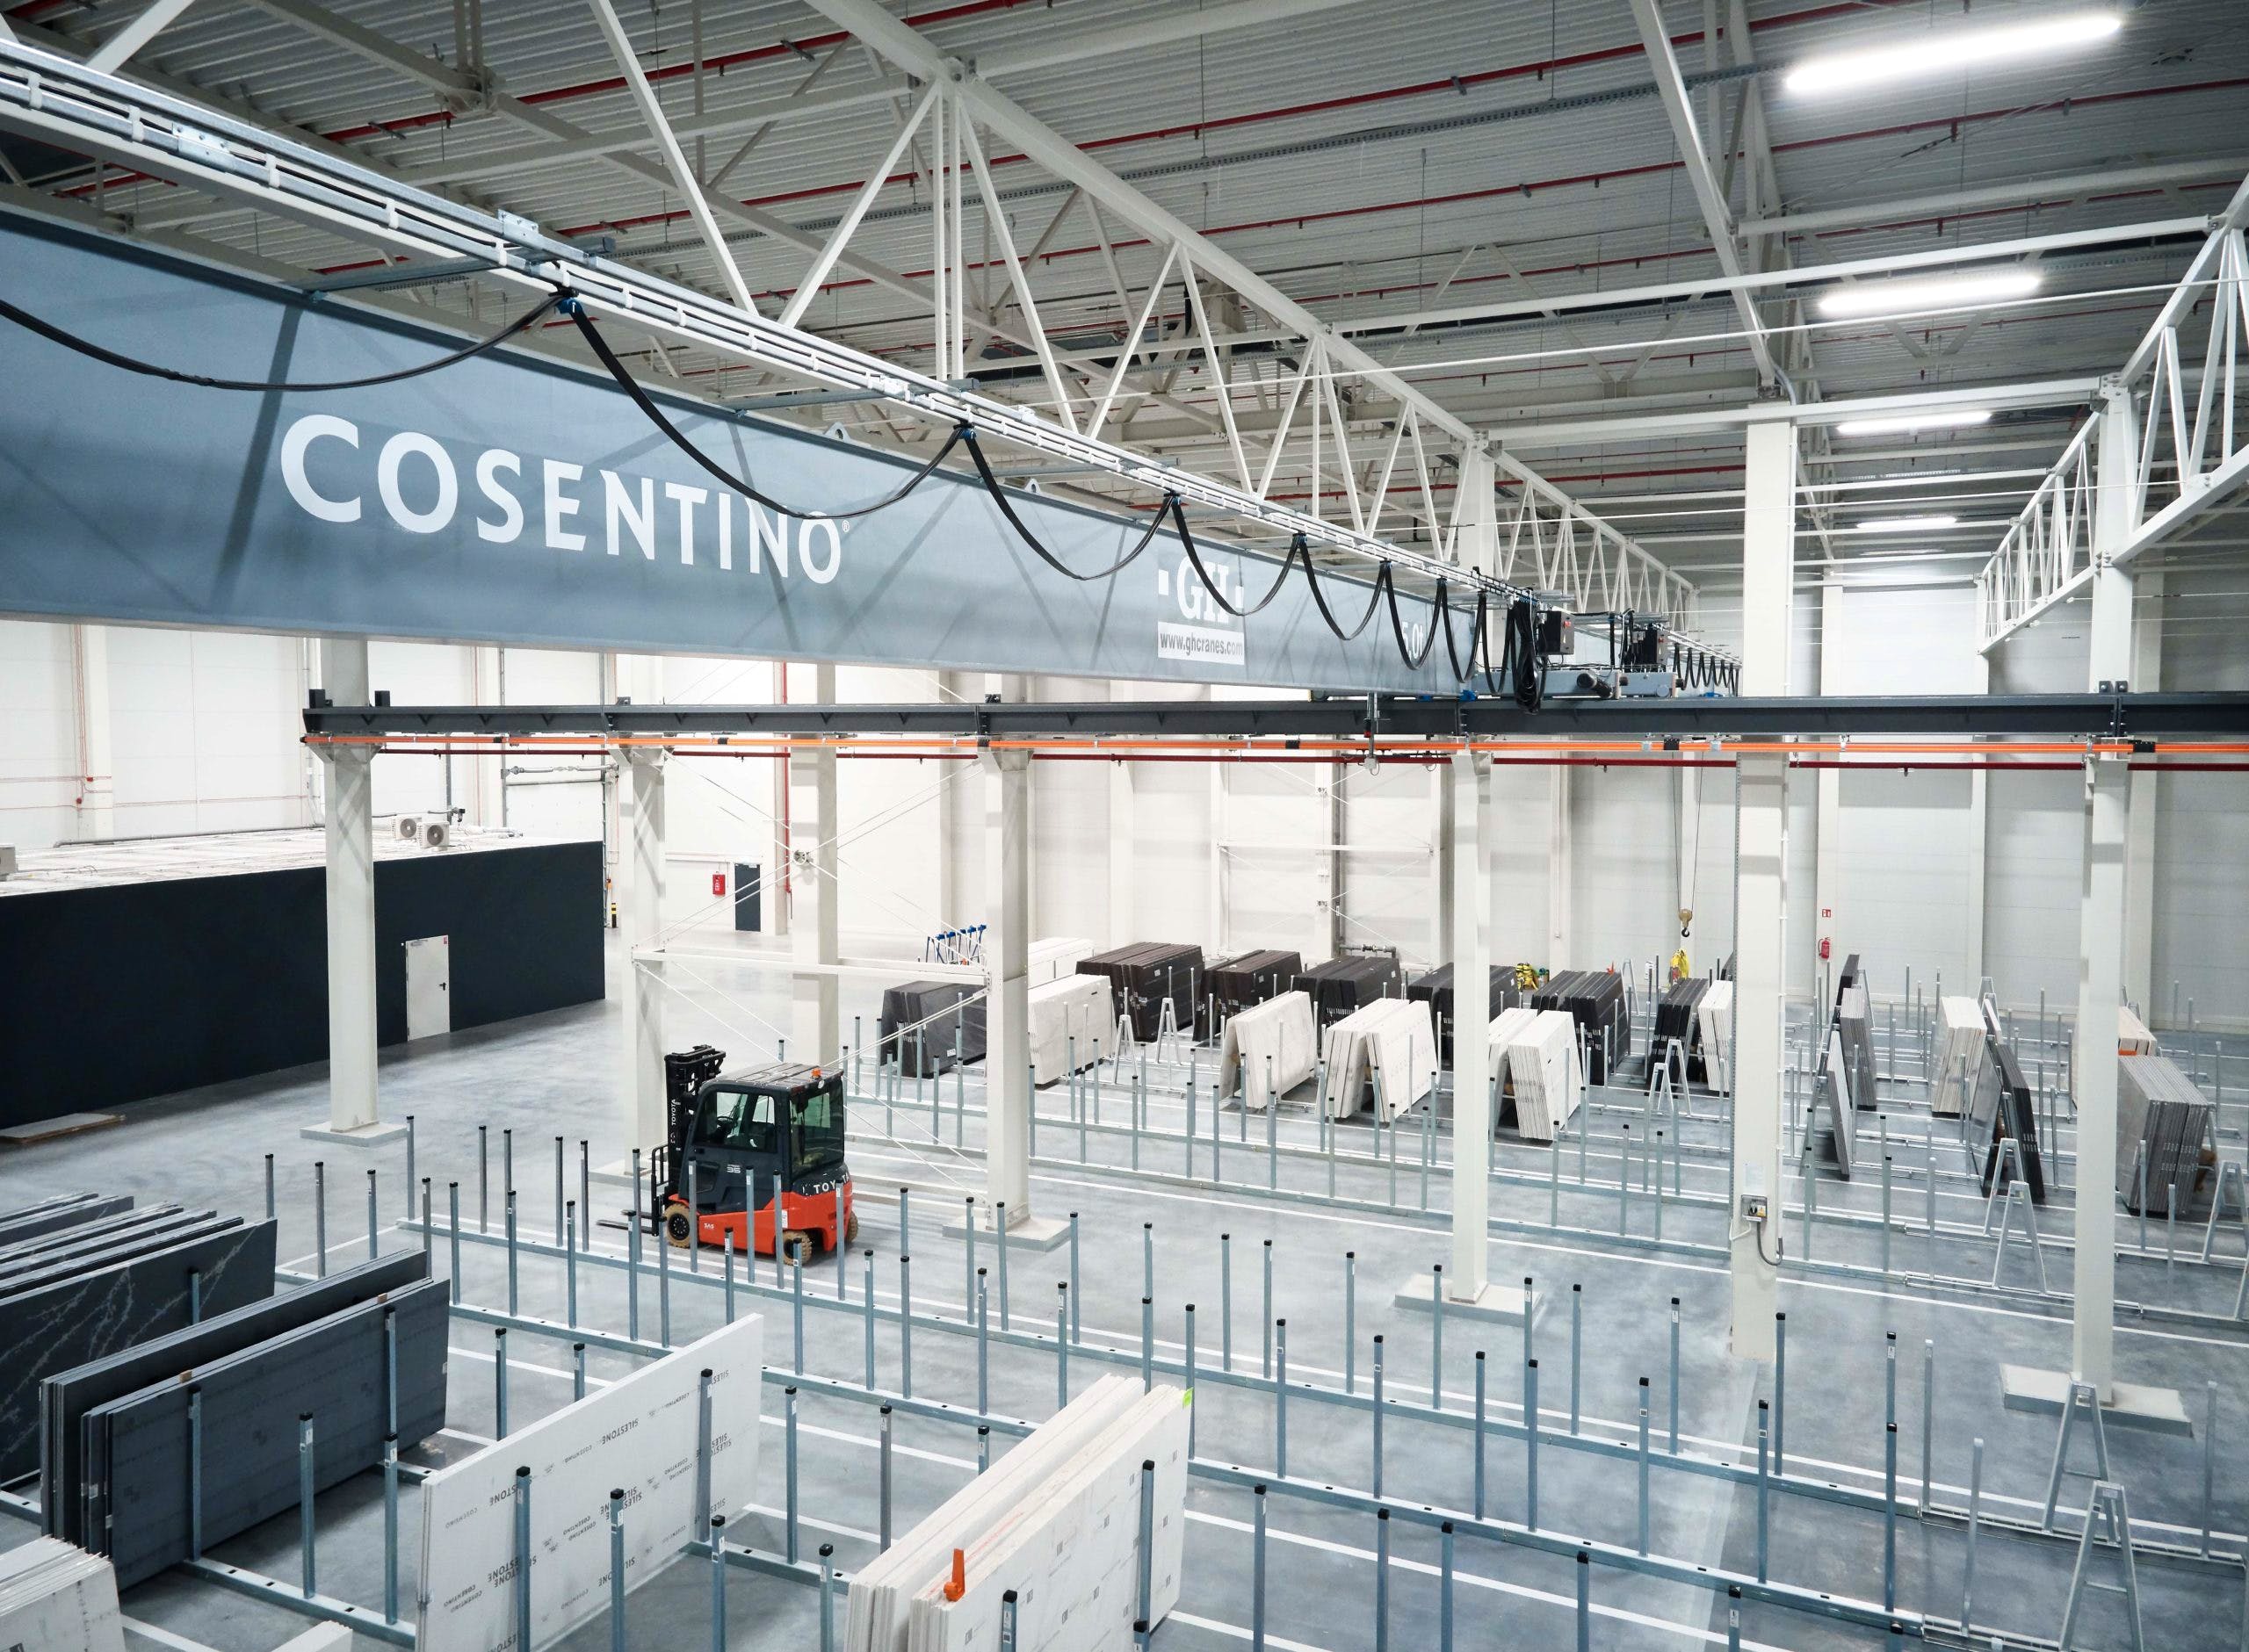 Image of DJI 0002 min scaled 6 in Cosentino Officially Opens New Vancouver Centre Showroom - Cosentino